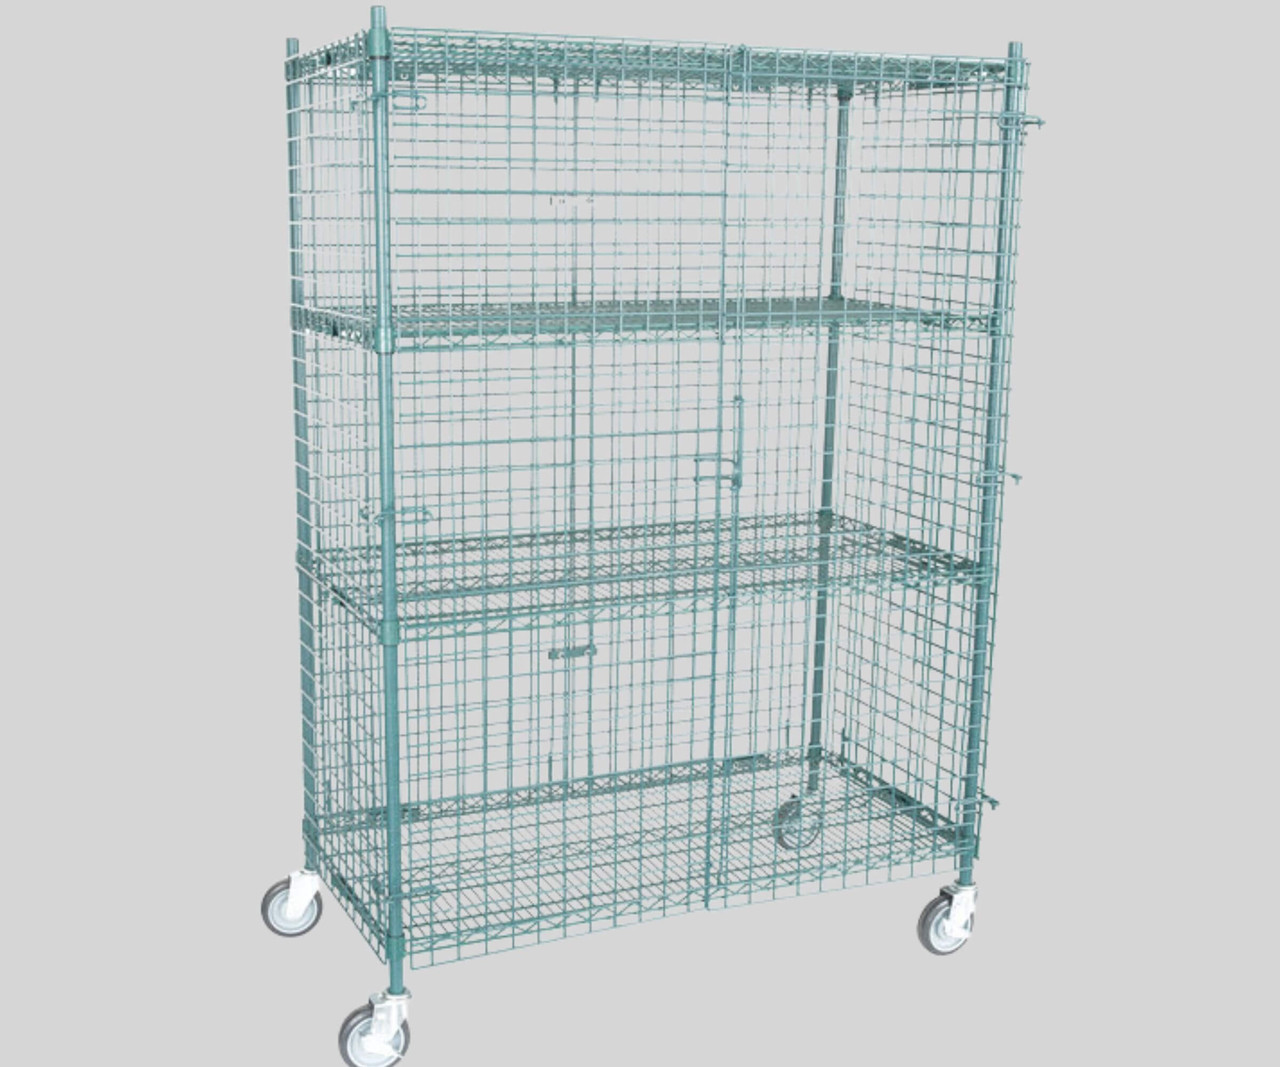 Chicken Pieces CP NSF Mobile Green Wire Security Cage Kit - 24" x 48" x 69" | Secure & Mobile Storage Solution